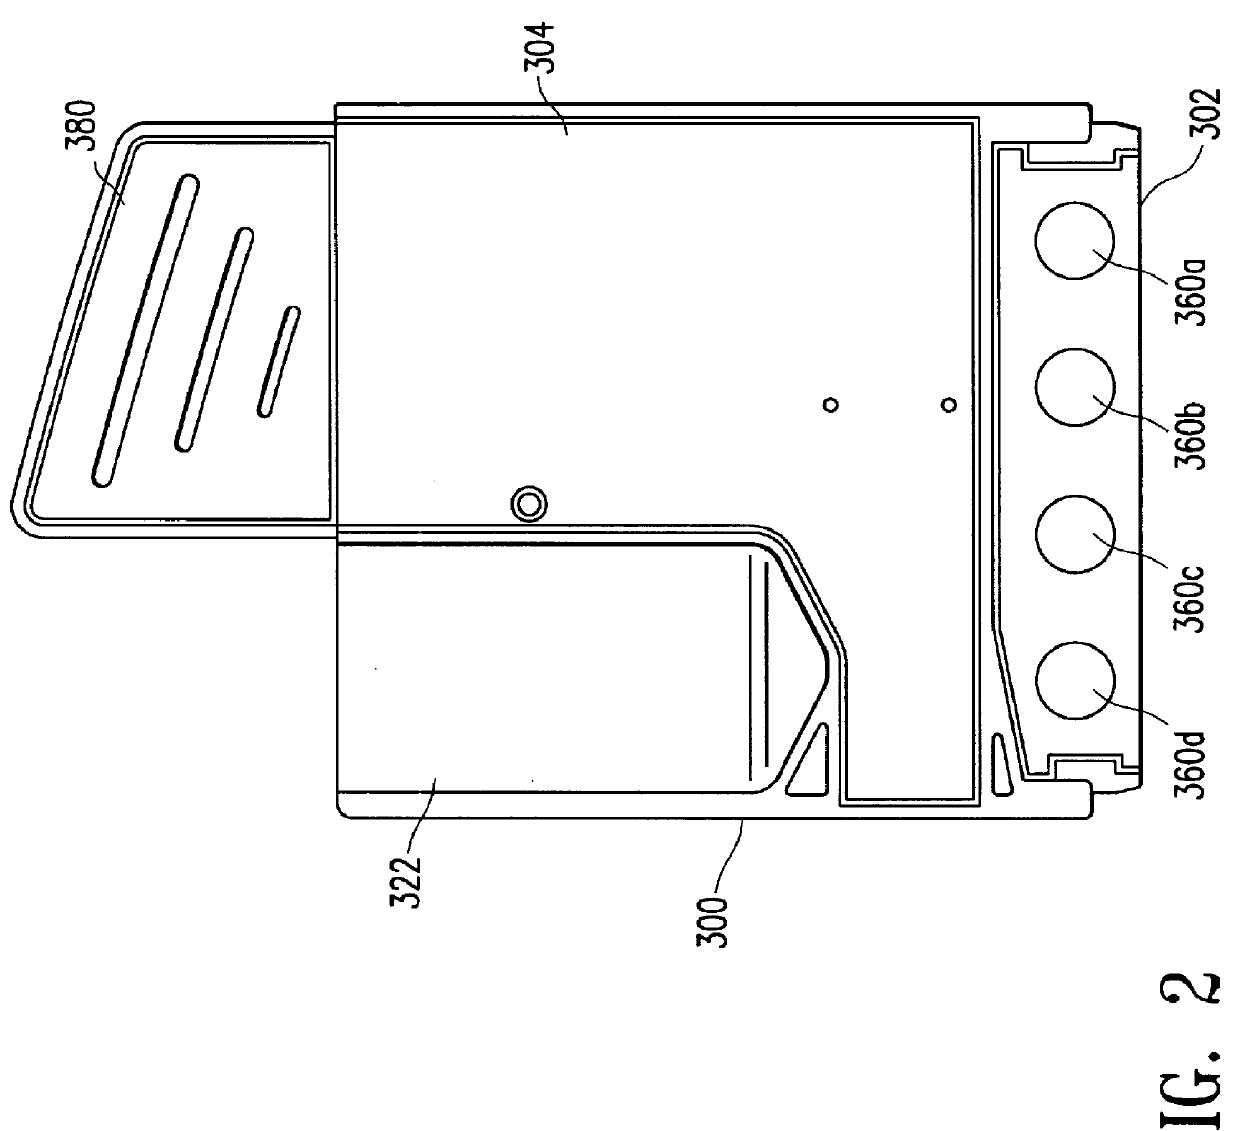 Device for receiving and processing a sample